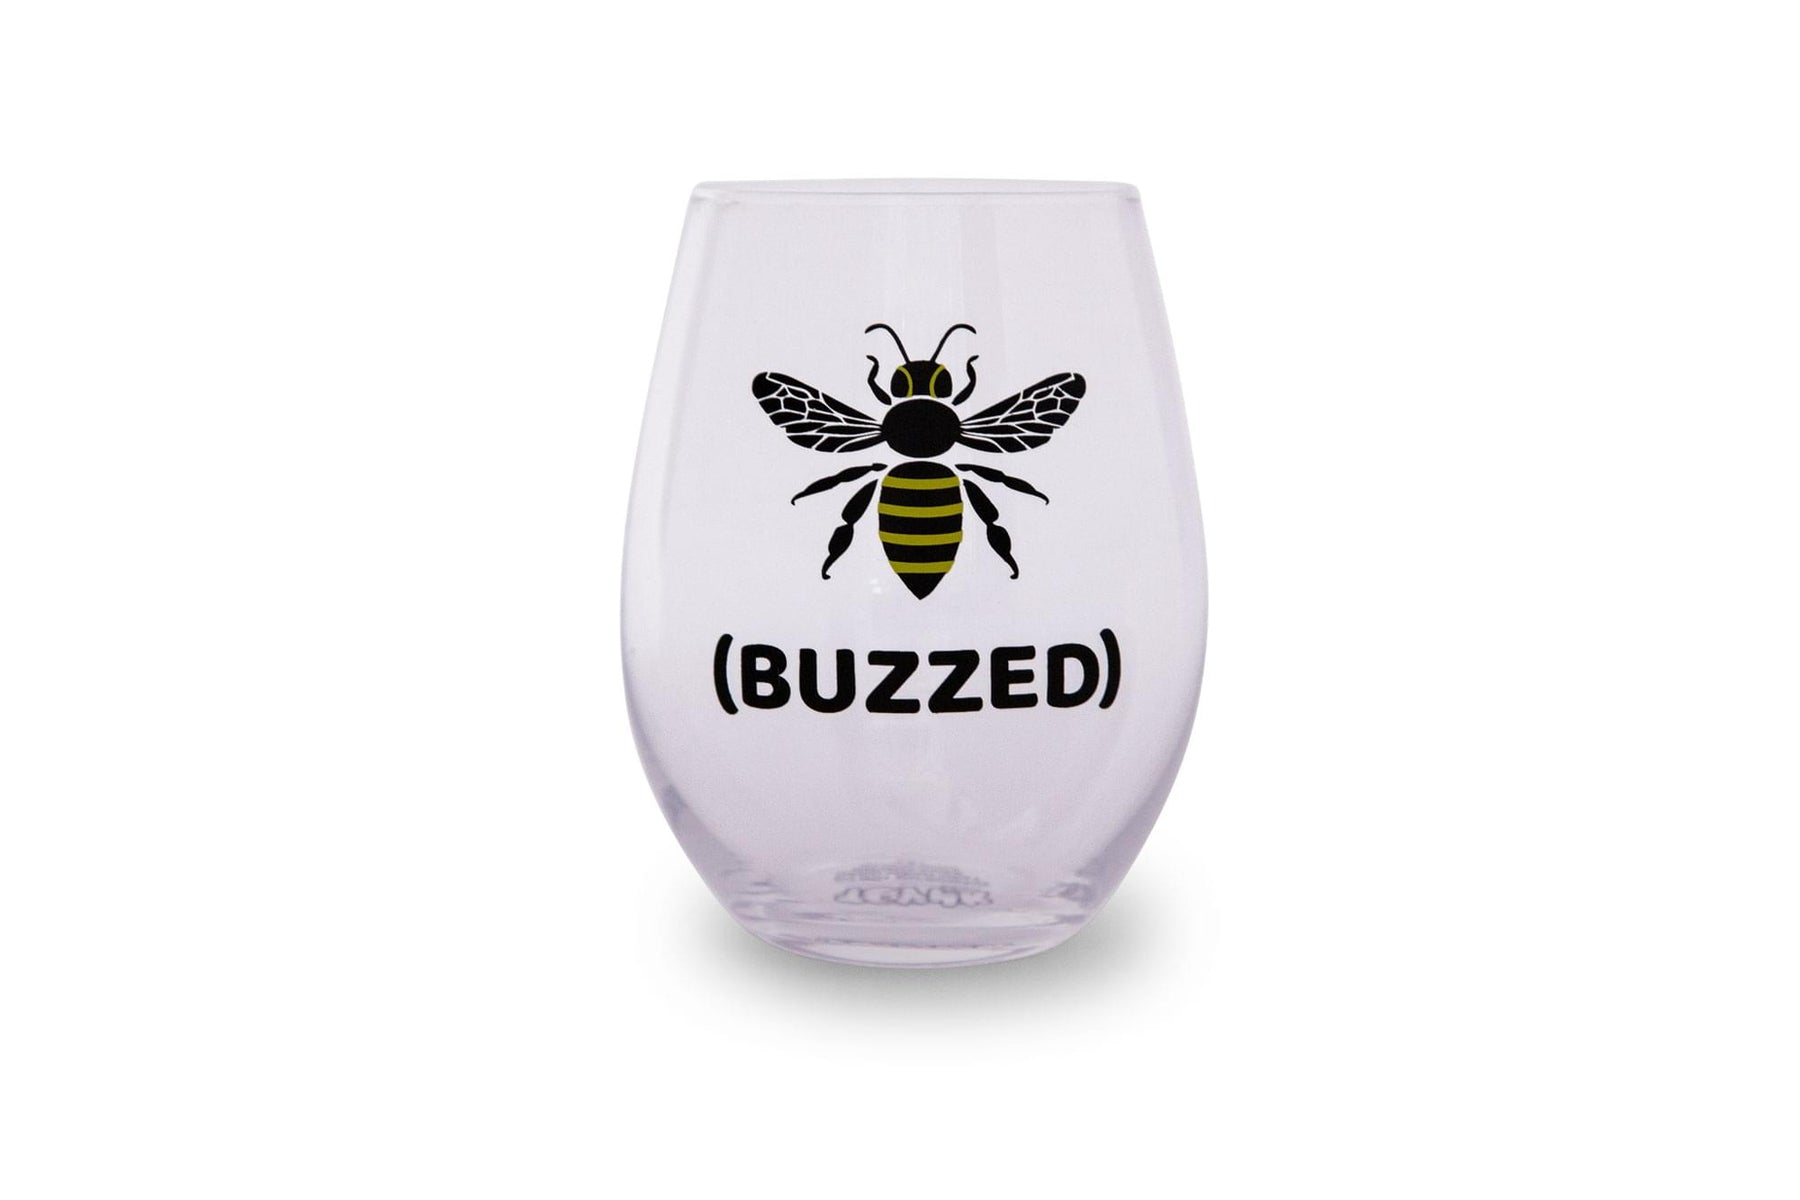 Bumble Bee "Buzzed" Oversized Stemless Wine Glass | Holds 20 Ounces